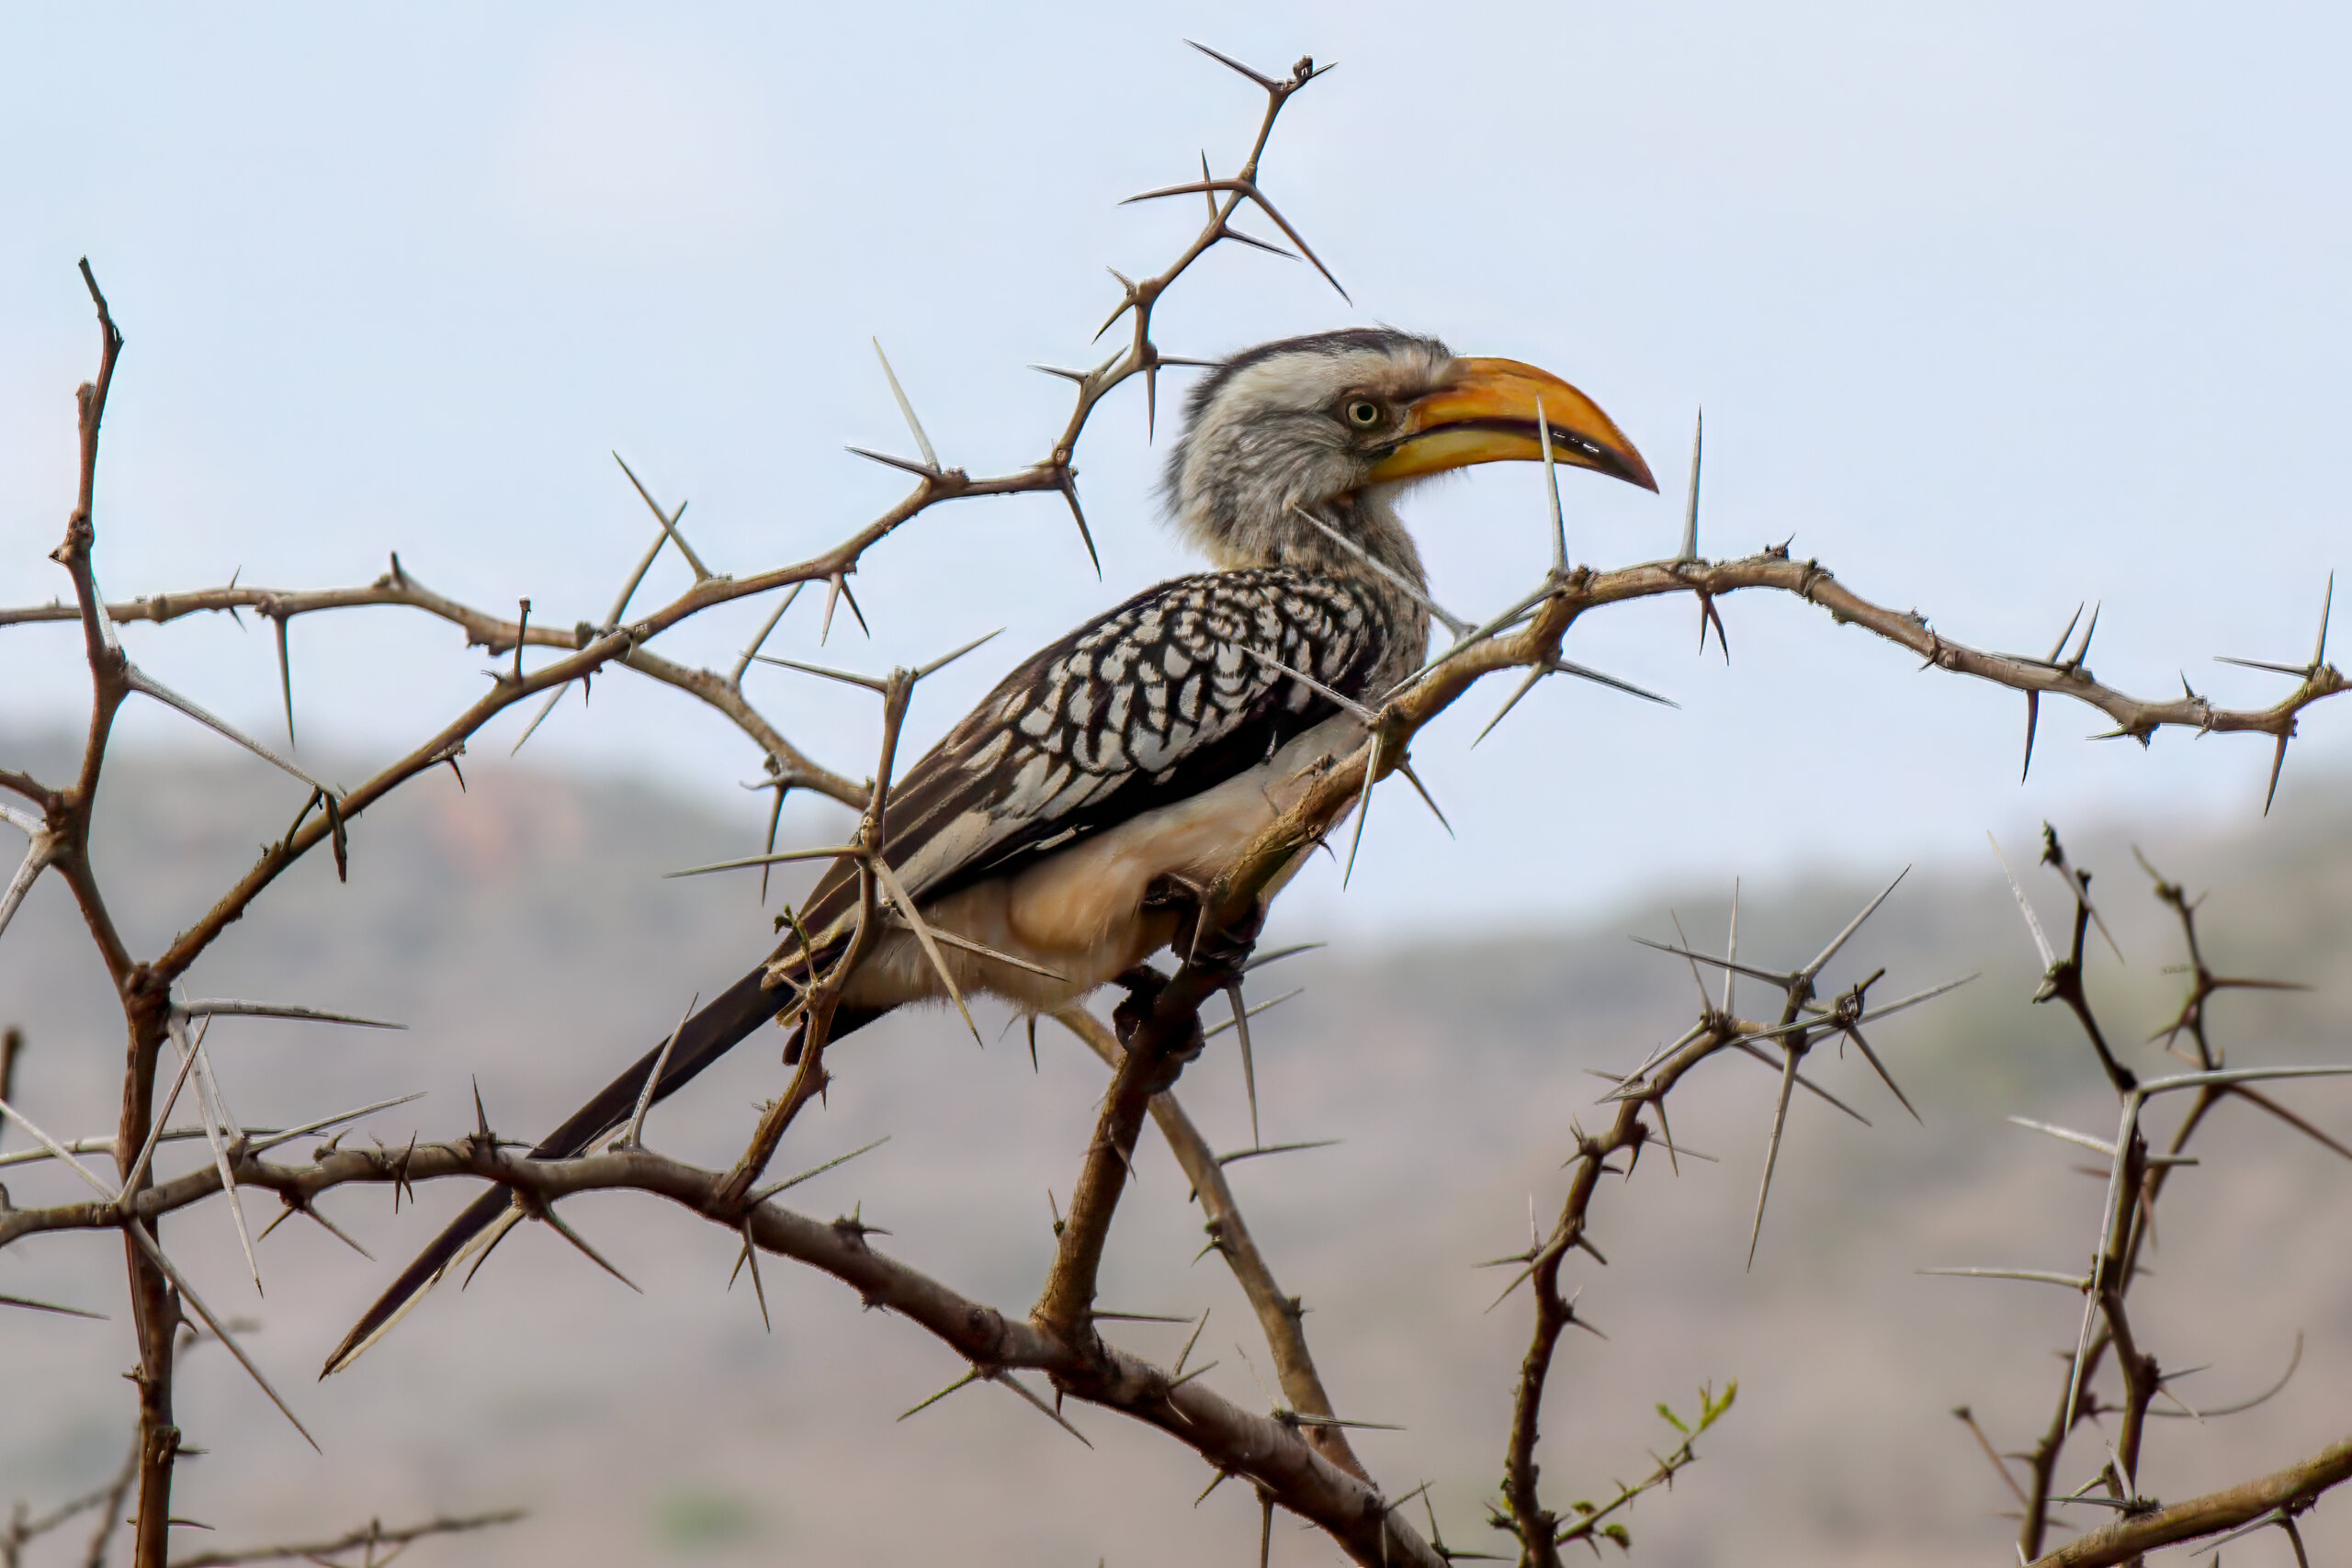 Southern Yellow-billed Hornbill (Tockus leucomelas) @ Thanda Private Game Reserve, South Africa. Photo: Håvard Rosenlund